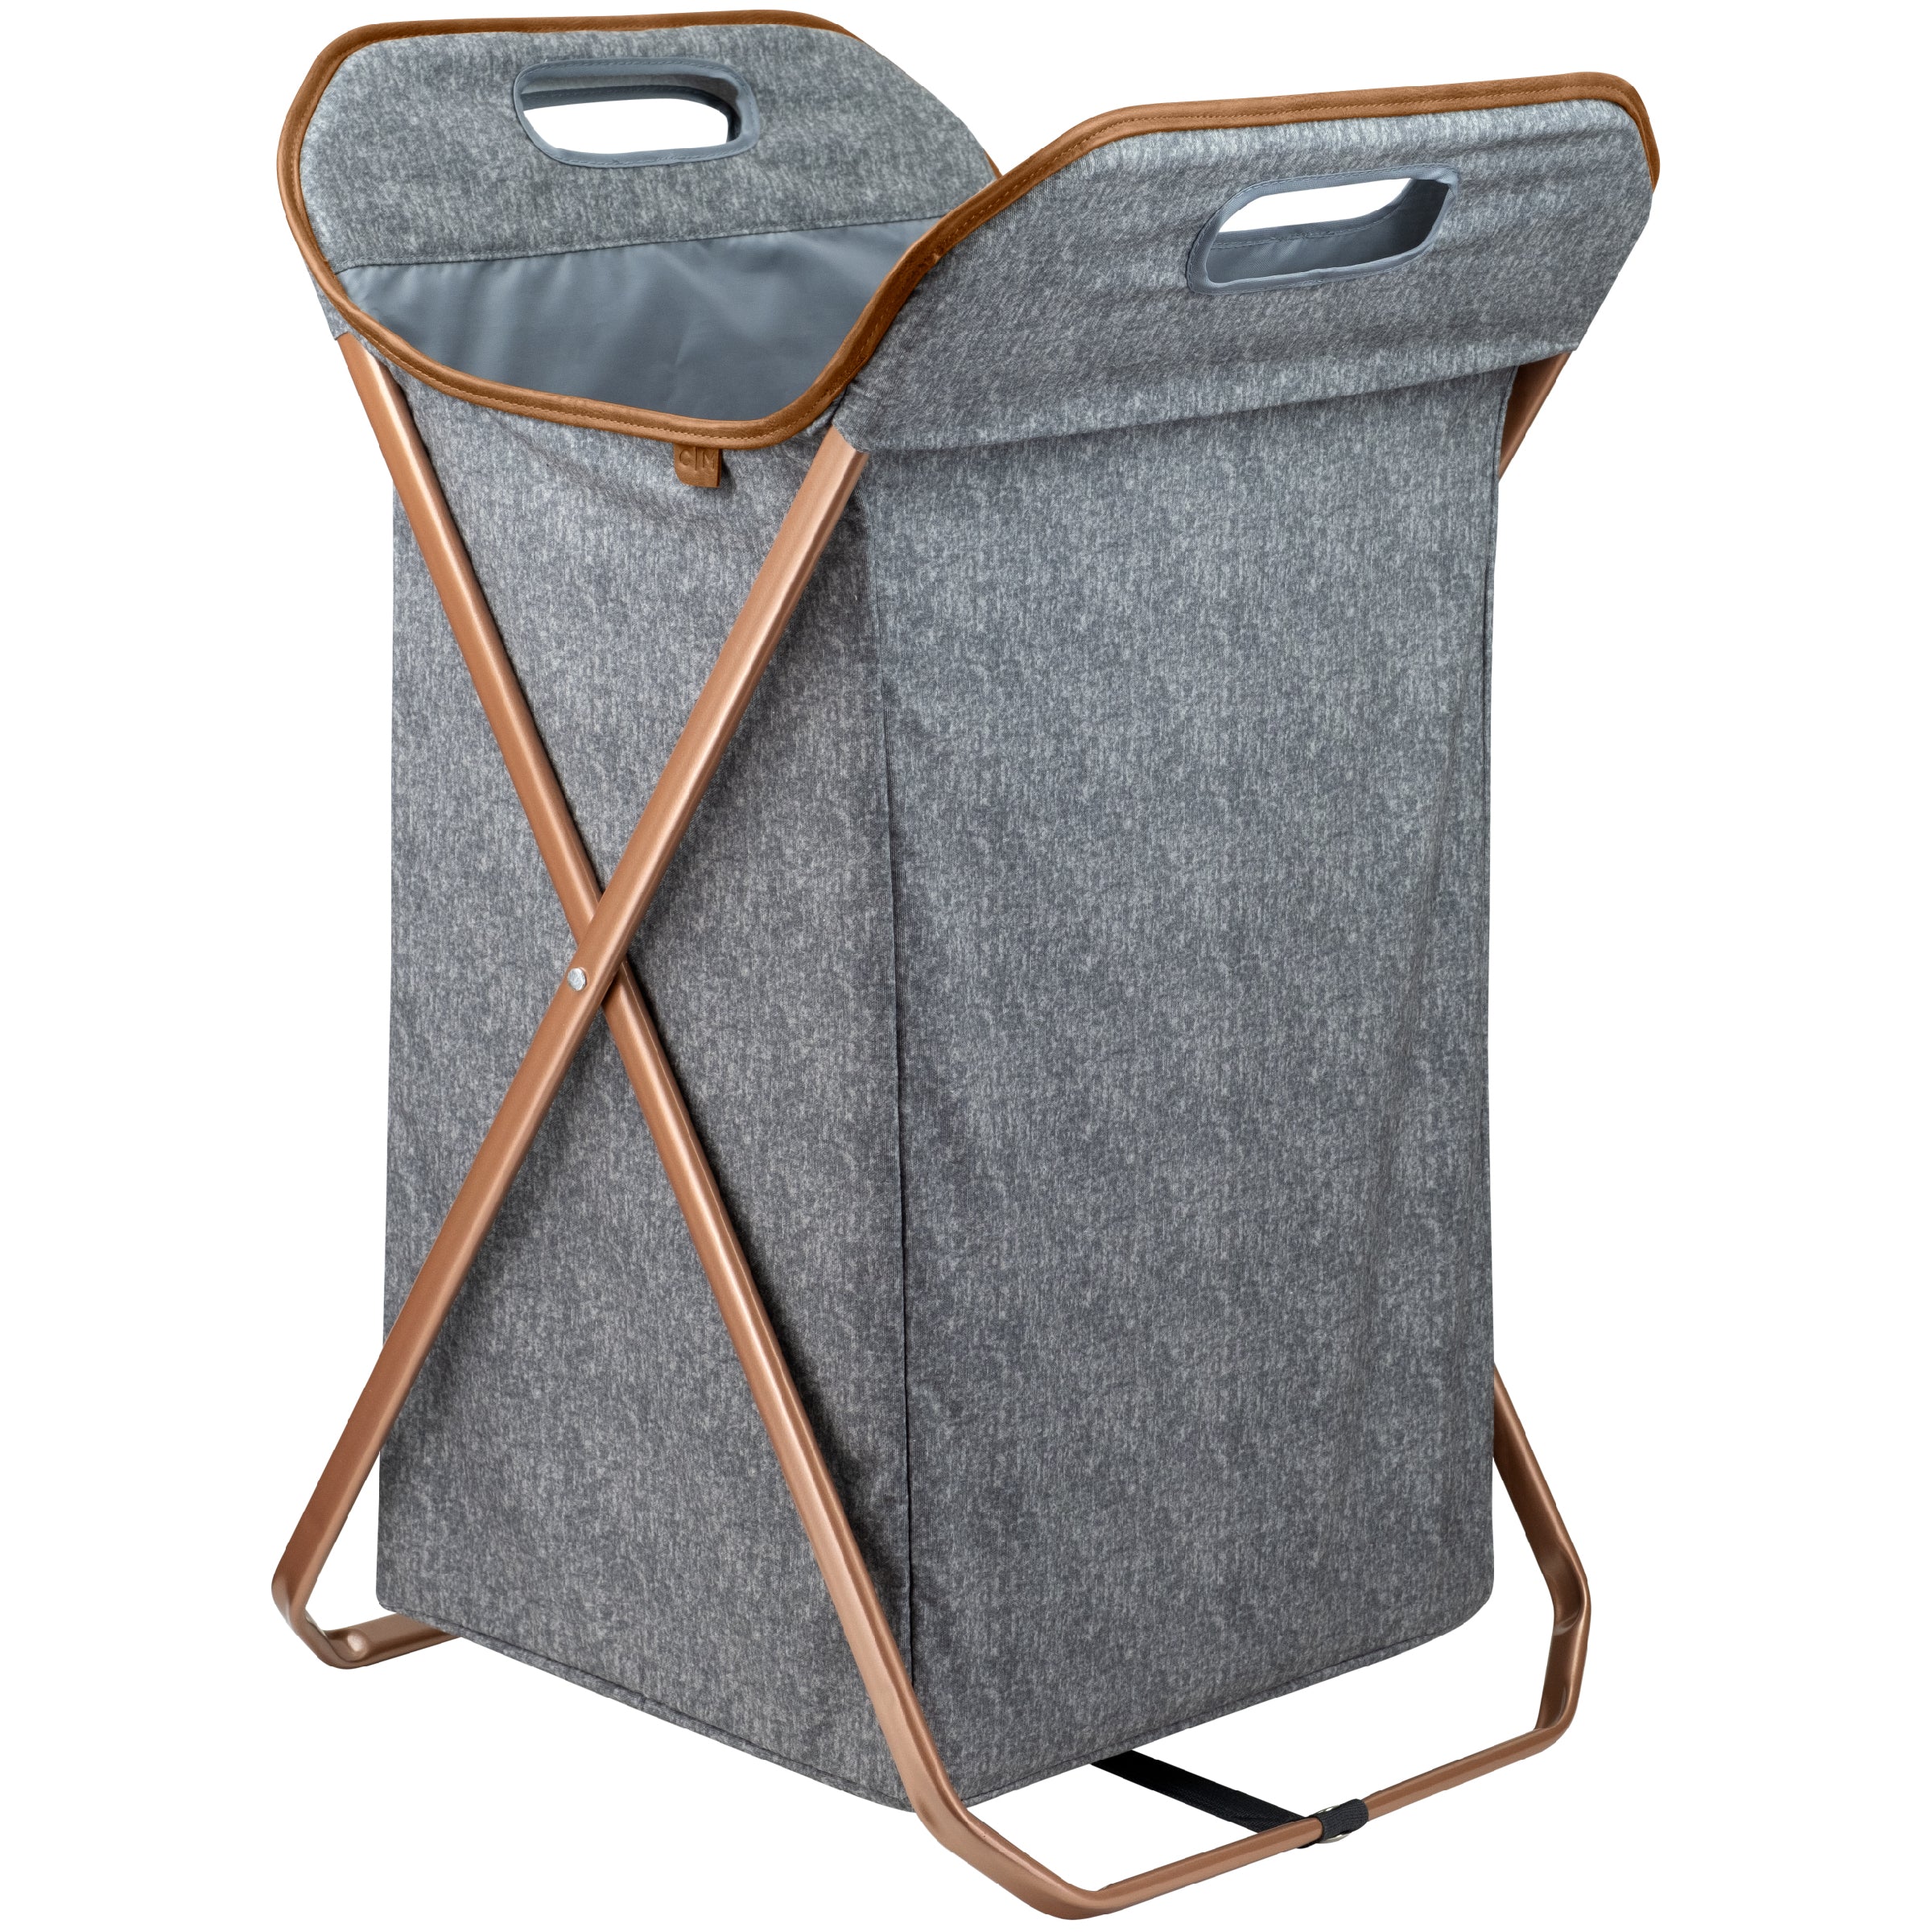 CleverMade Collapsible Fabric Laundry Basket Premium, 2 pack